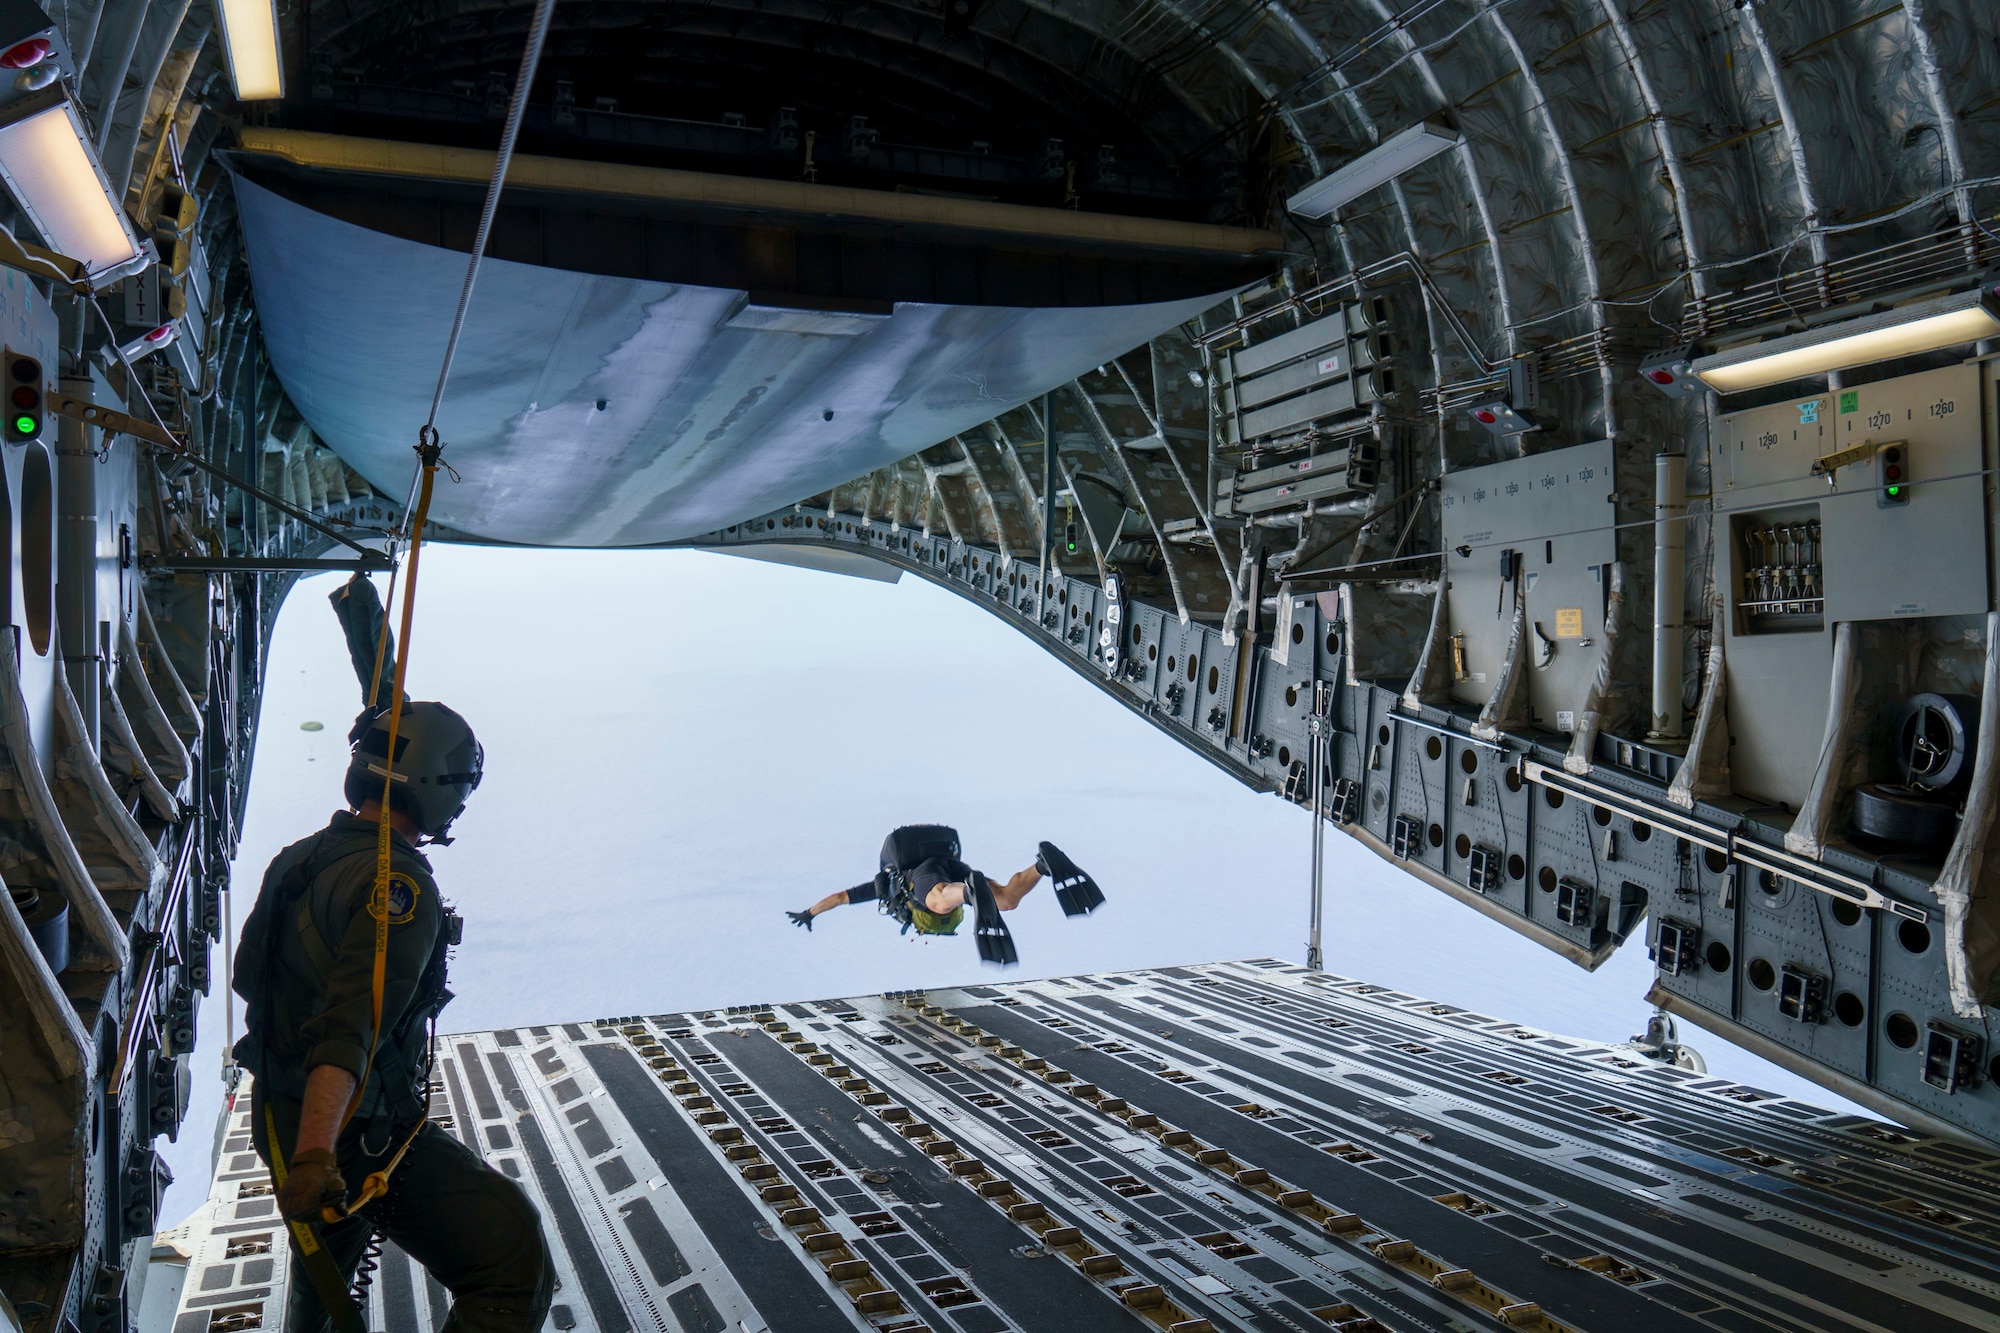 Maj. Brock Roden, a combat rescue officer with 212th Rescue Squadron, Alaska Air National Guard, conducts a freefall-parachute jump into the Pacific Ocean from a C-17 Globemaster III aircraft near Kapolei, Hawaii, Jan. 26, 2021, during Exercise H20. Alaska Air National Guardsmen were in Hawaii training during Exercise H20 in January and February, honing their long-range search and rescue capability in support of the NASA human spaceflight program .